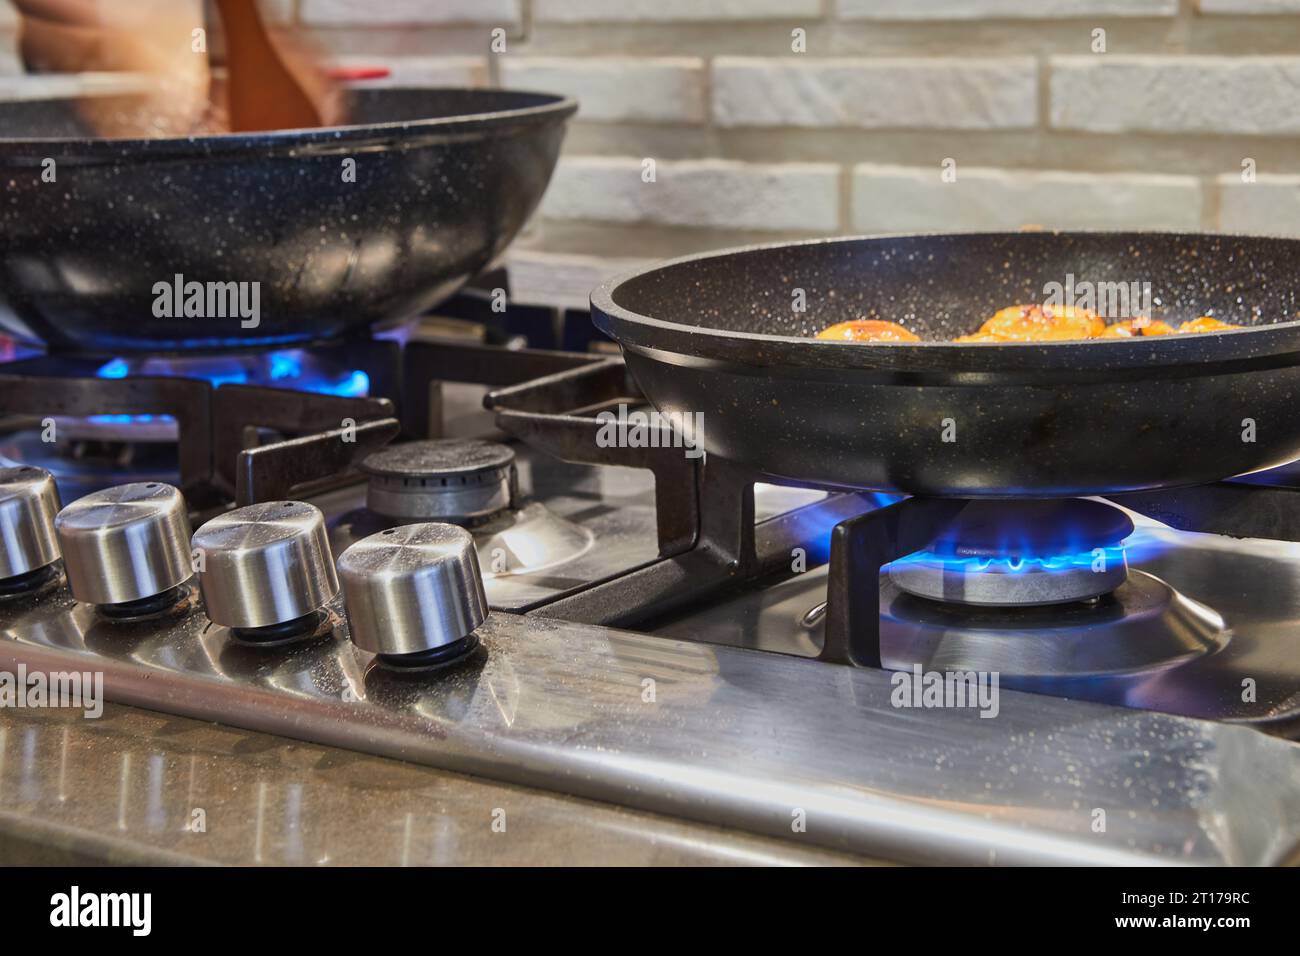 https://c8.alamy.com/comp/2T179RC/frying-pans-on-burner-fire-on-gas-stove-with-dish-being-prepared-2T179RC.jpg